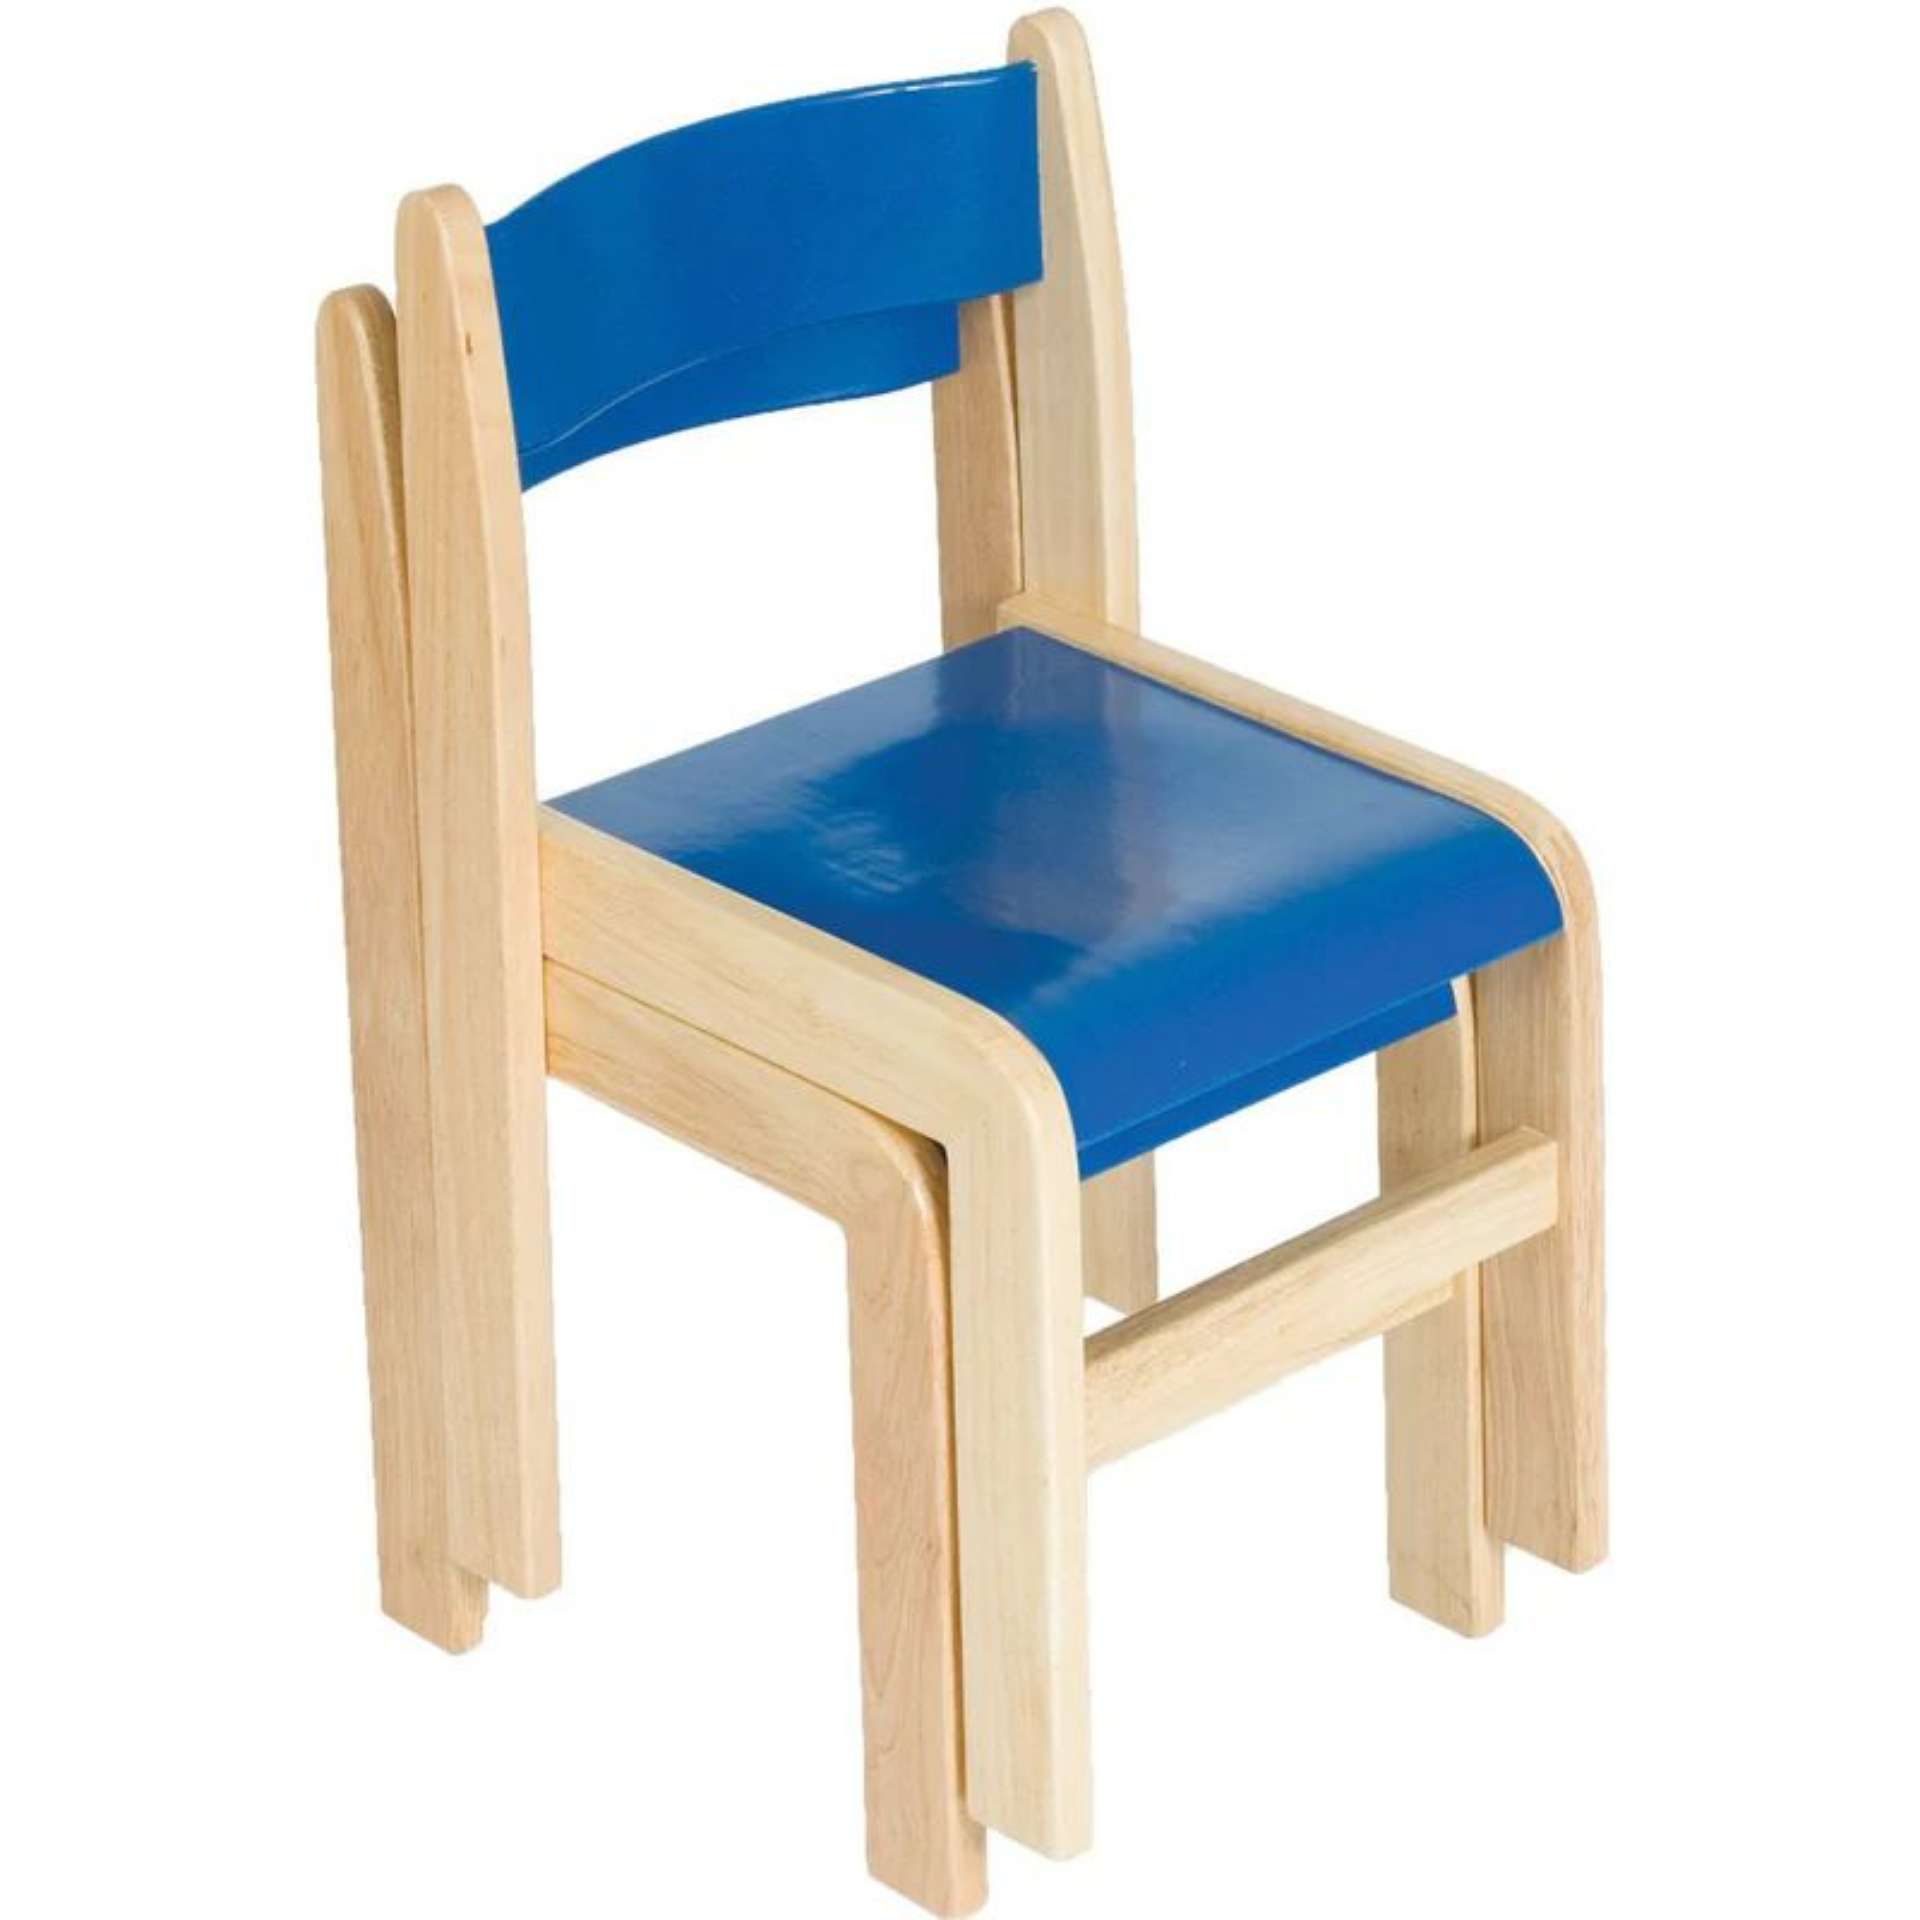 Pallet to Contain 12 x Sets of 2 Tuf Class Wooden Chair Blue. RRP £175 per set, total pallet RRP £